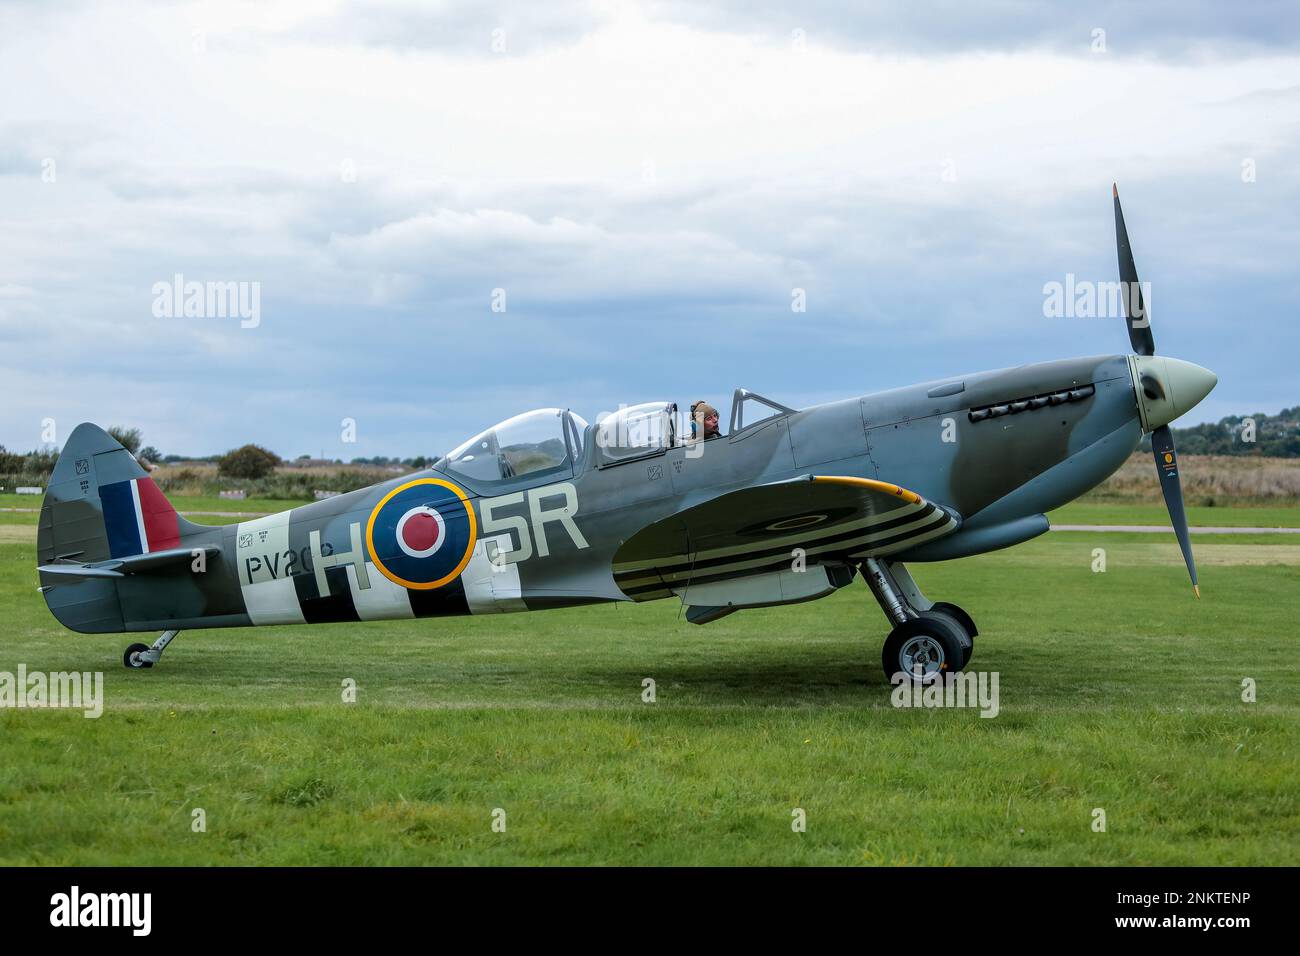 This is the Supermarine Spitfire IXT PV202 displayed at the Shoreham Airshow 2014, Shoreham Airport, East Sussex, UK. 30th August 2014 Stock Photo